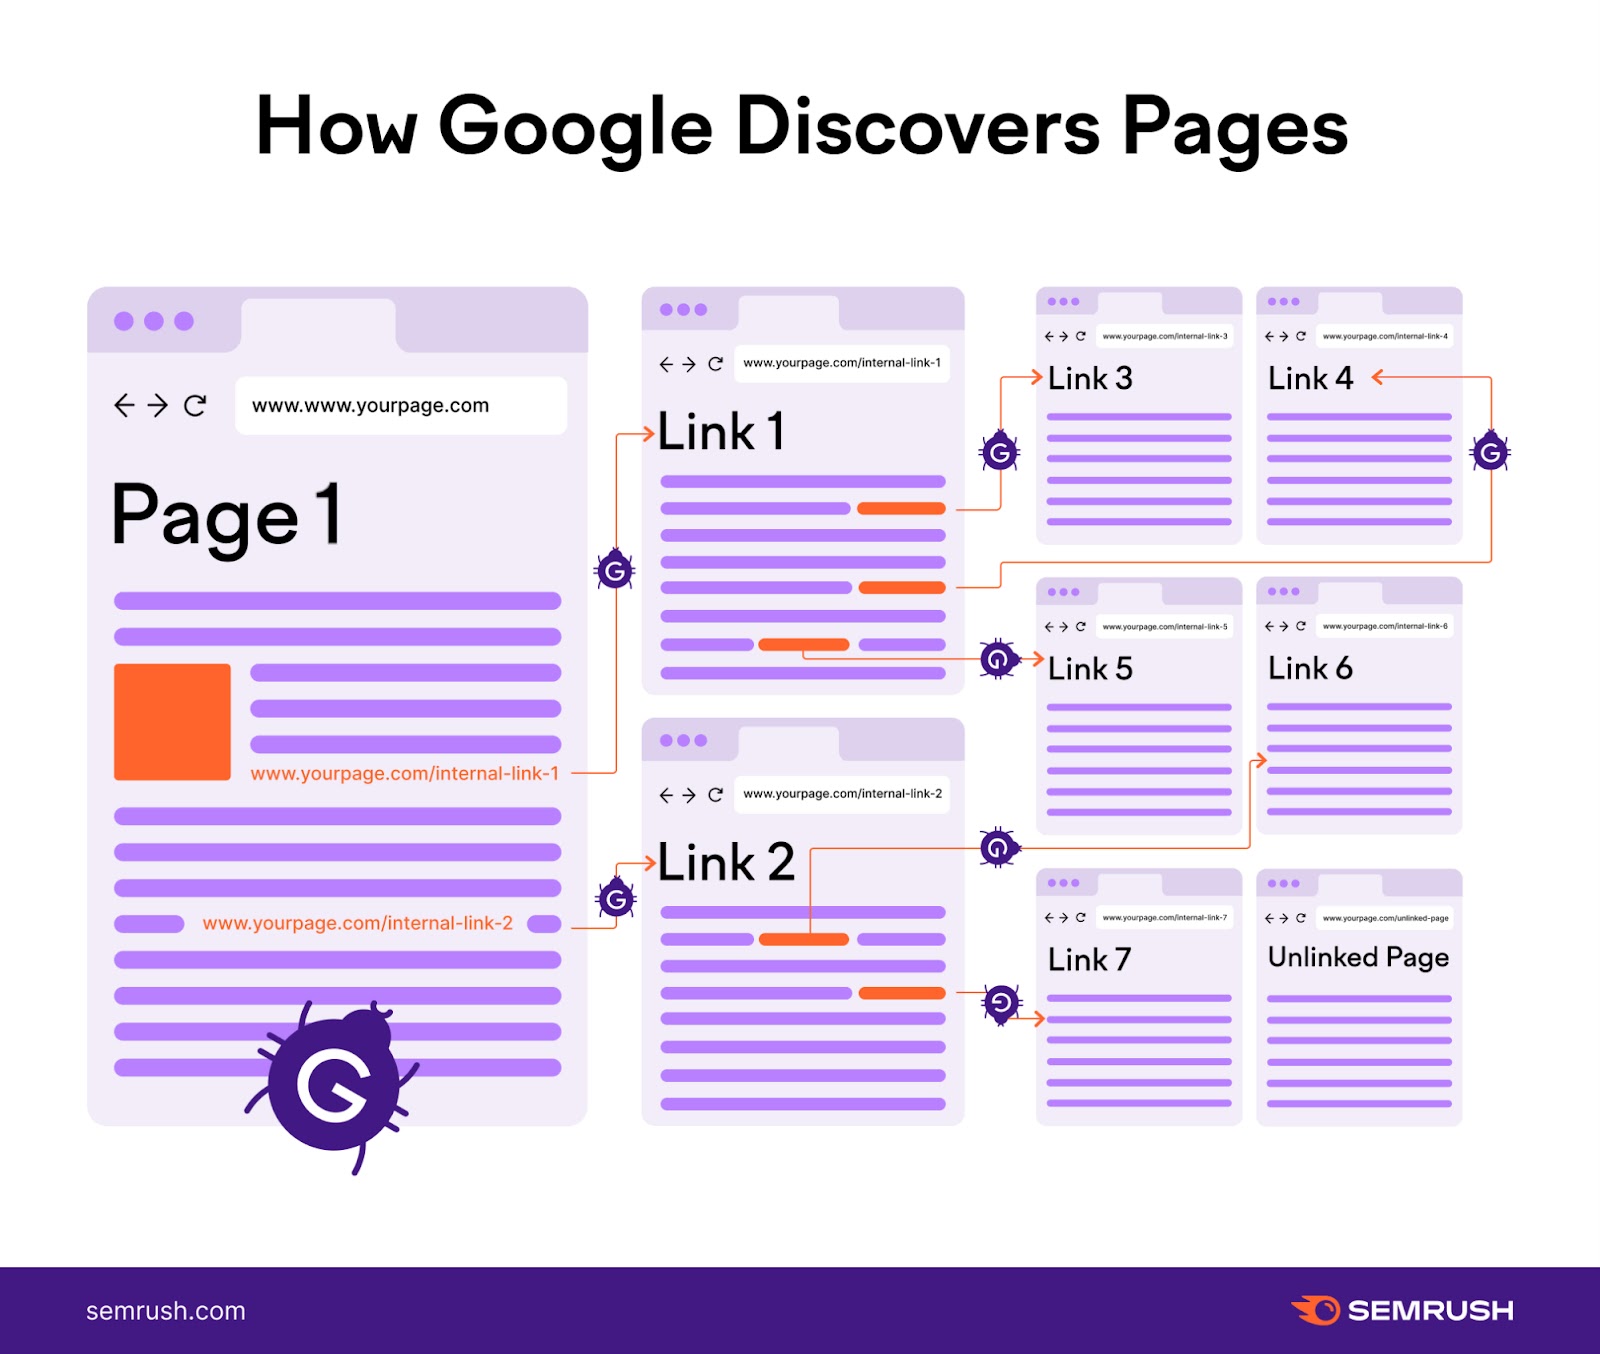 Illustration of how Google discovers pages using website crawlers